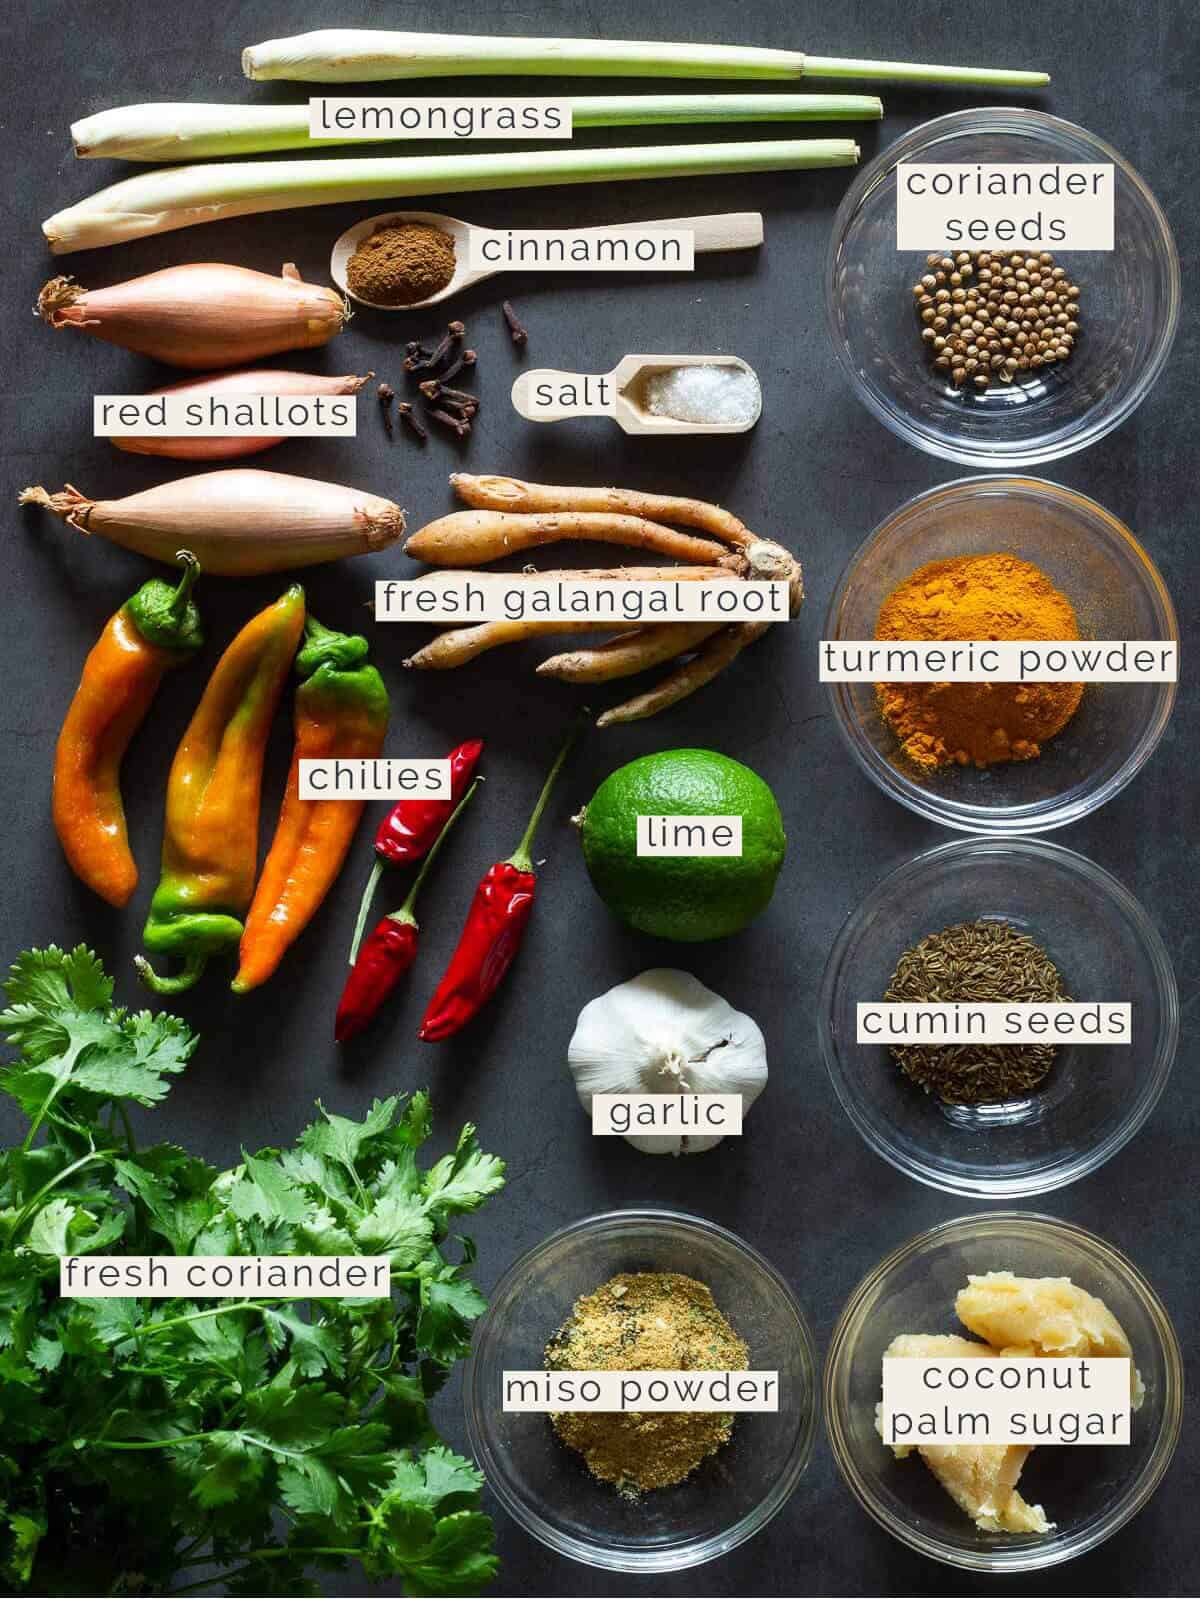 Thai Yellow Curry Ingredients.